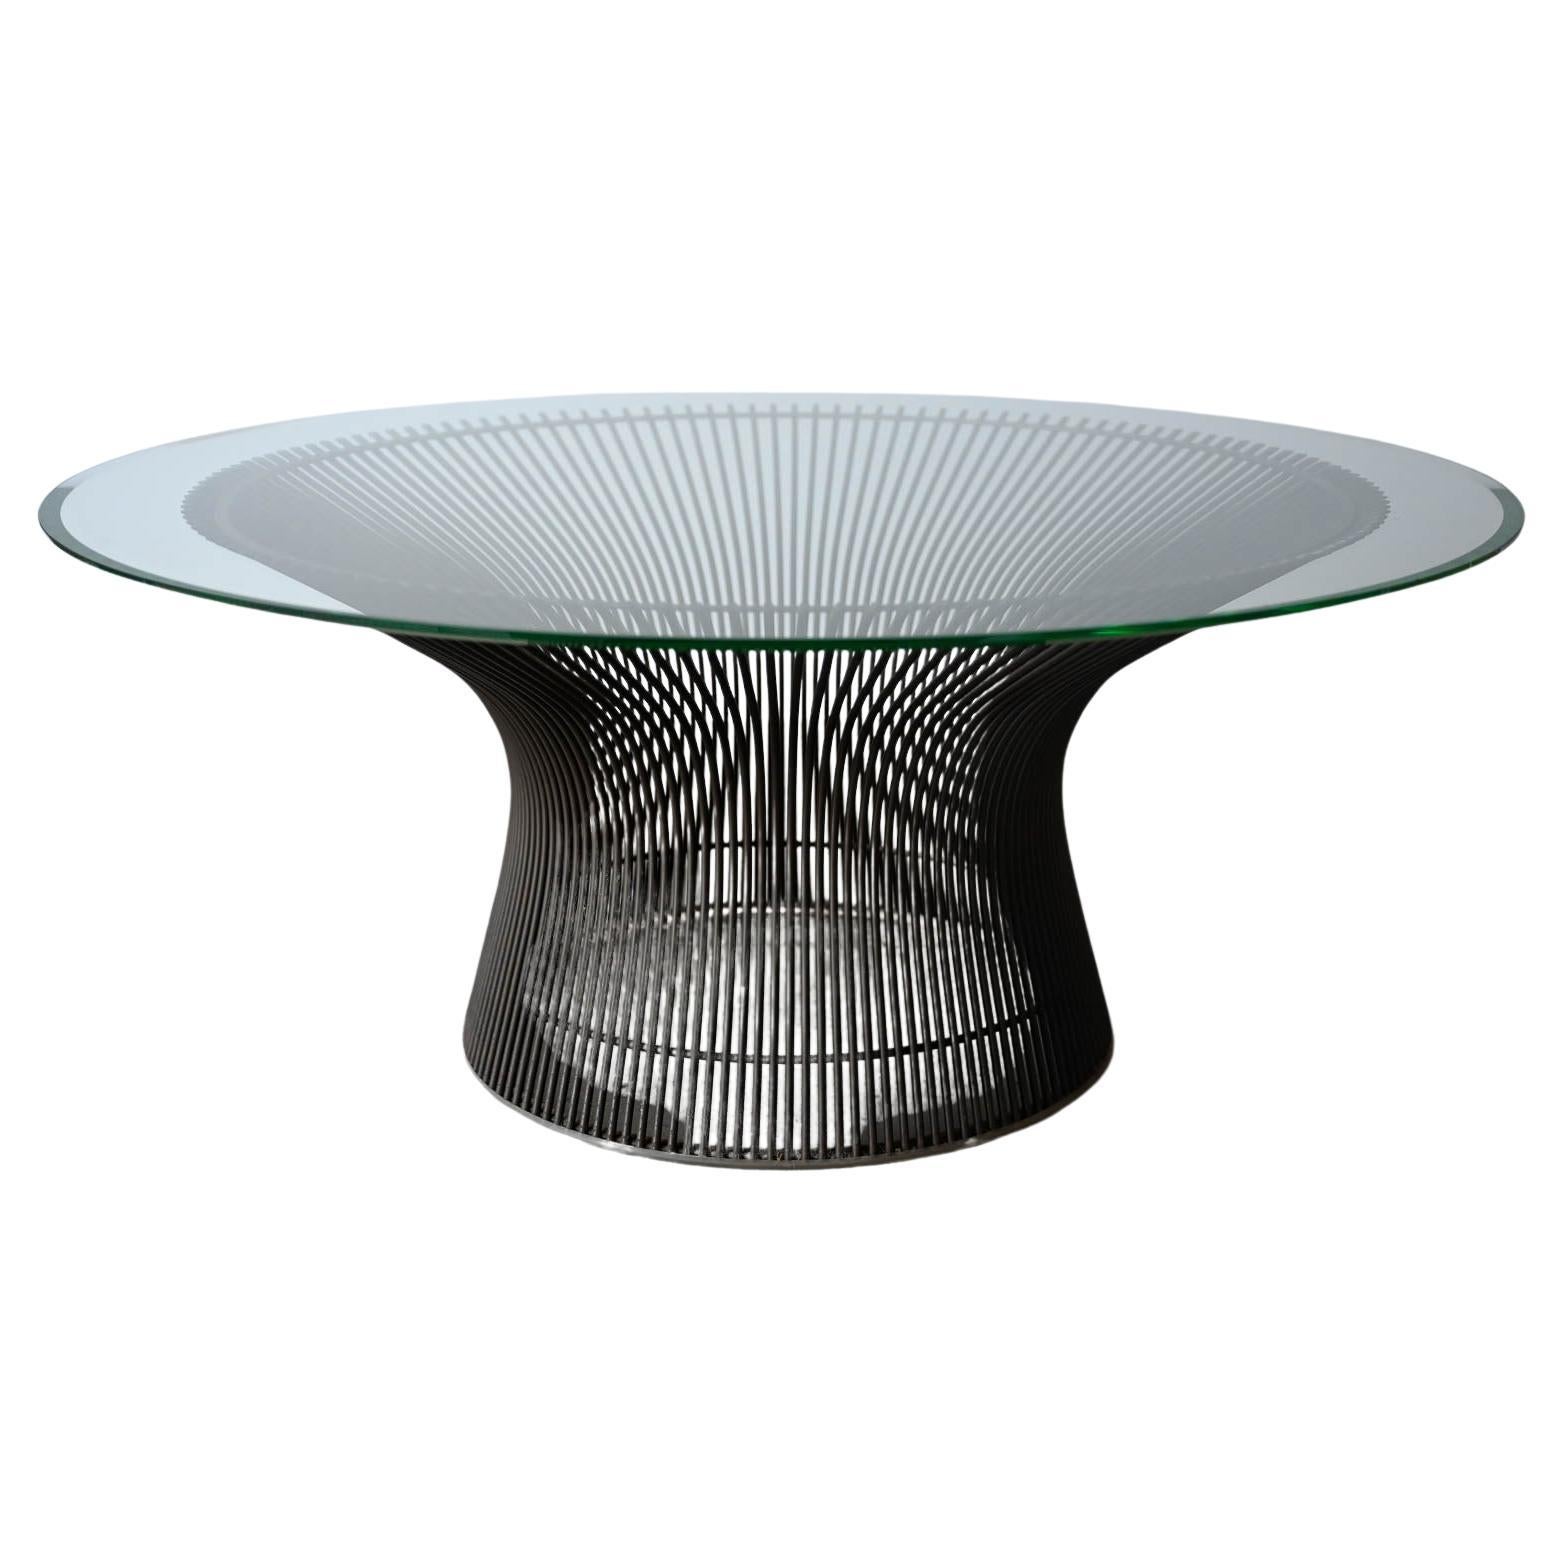 Vintage Warren Platner for Knoll Bronze Coffee Table, ca. 1970.  This beautiful table has been with a one-owner family since the 1970's and is in excellent original condition.  The bronze base is rare and no longer in production by Knoll.  Original